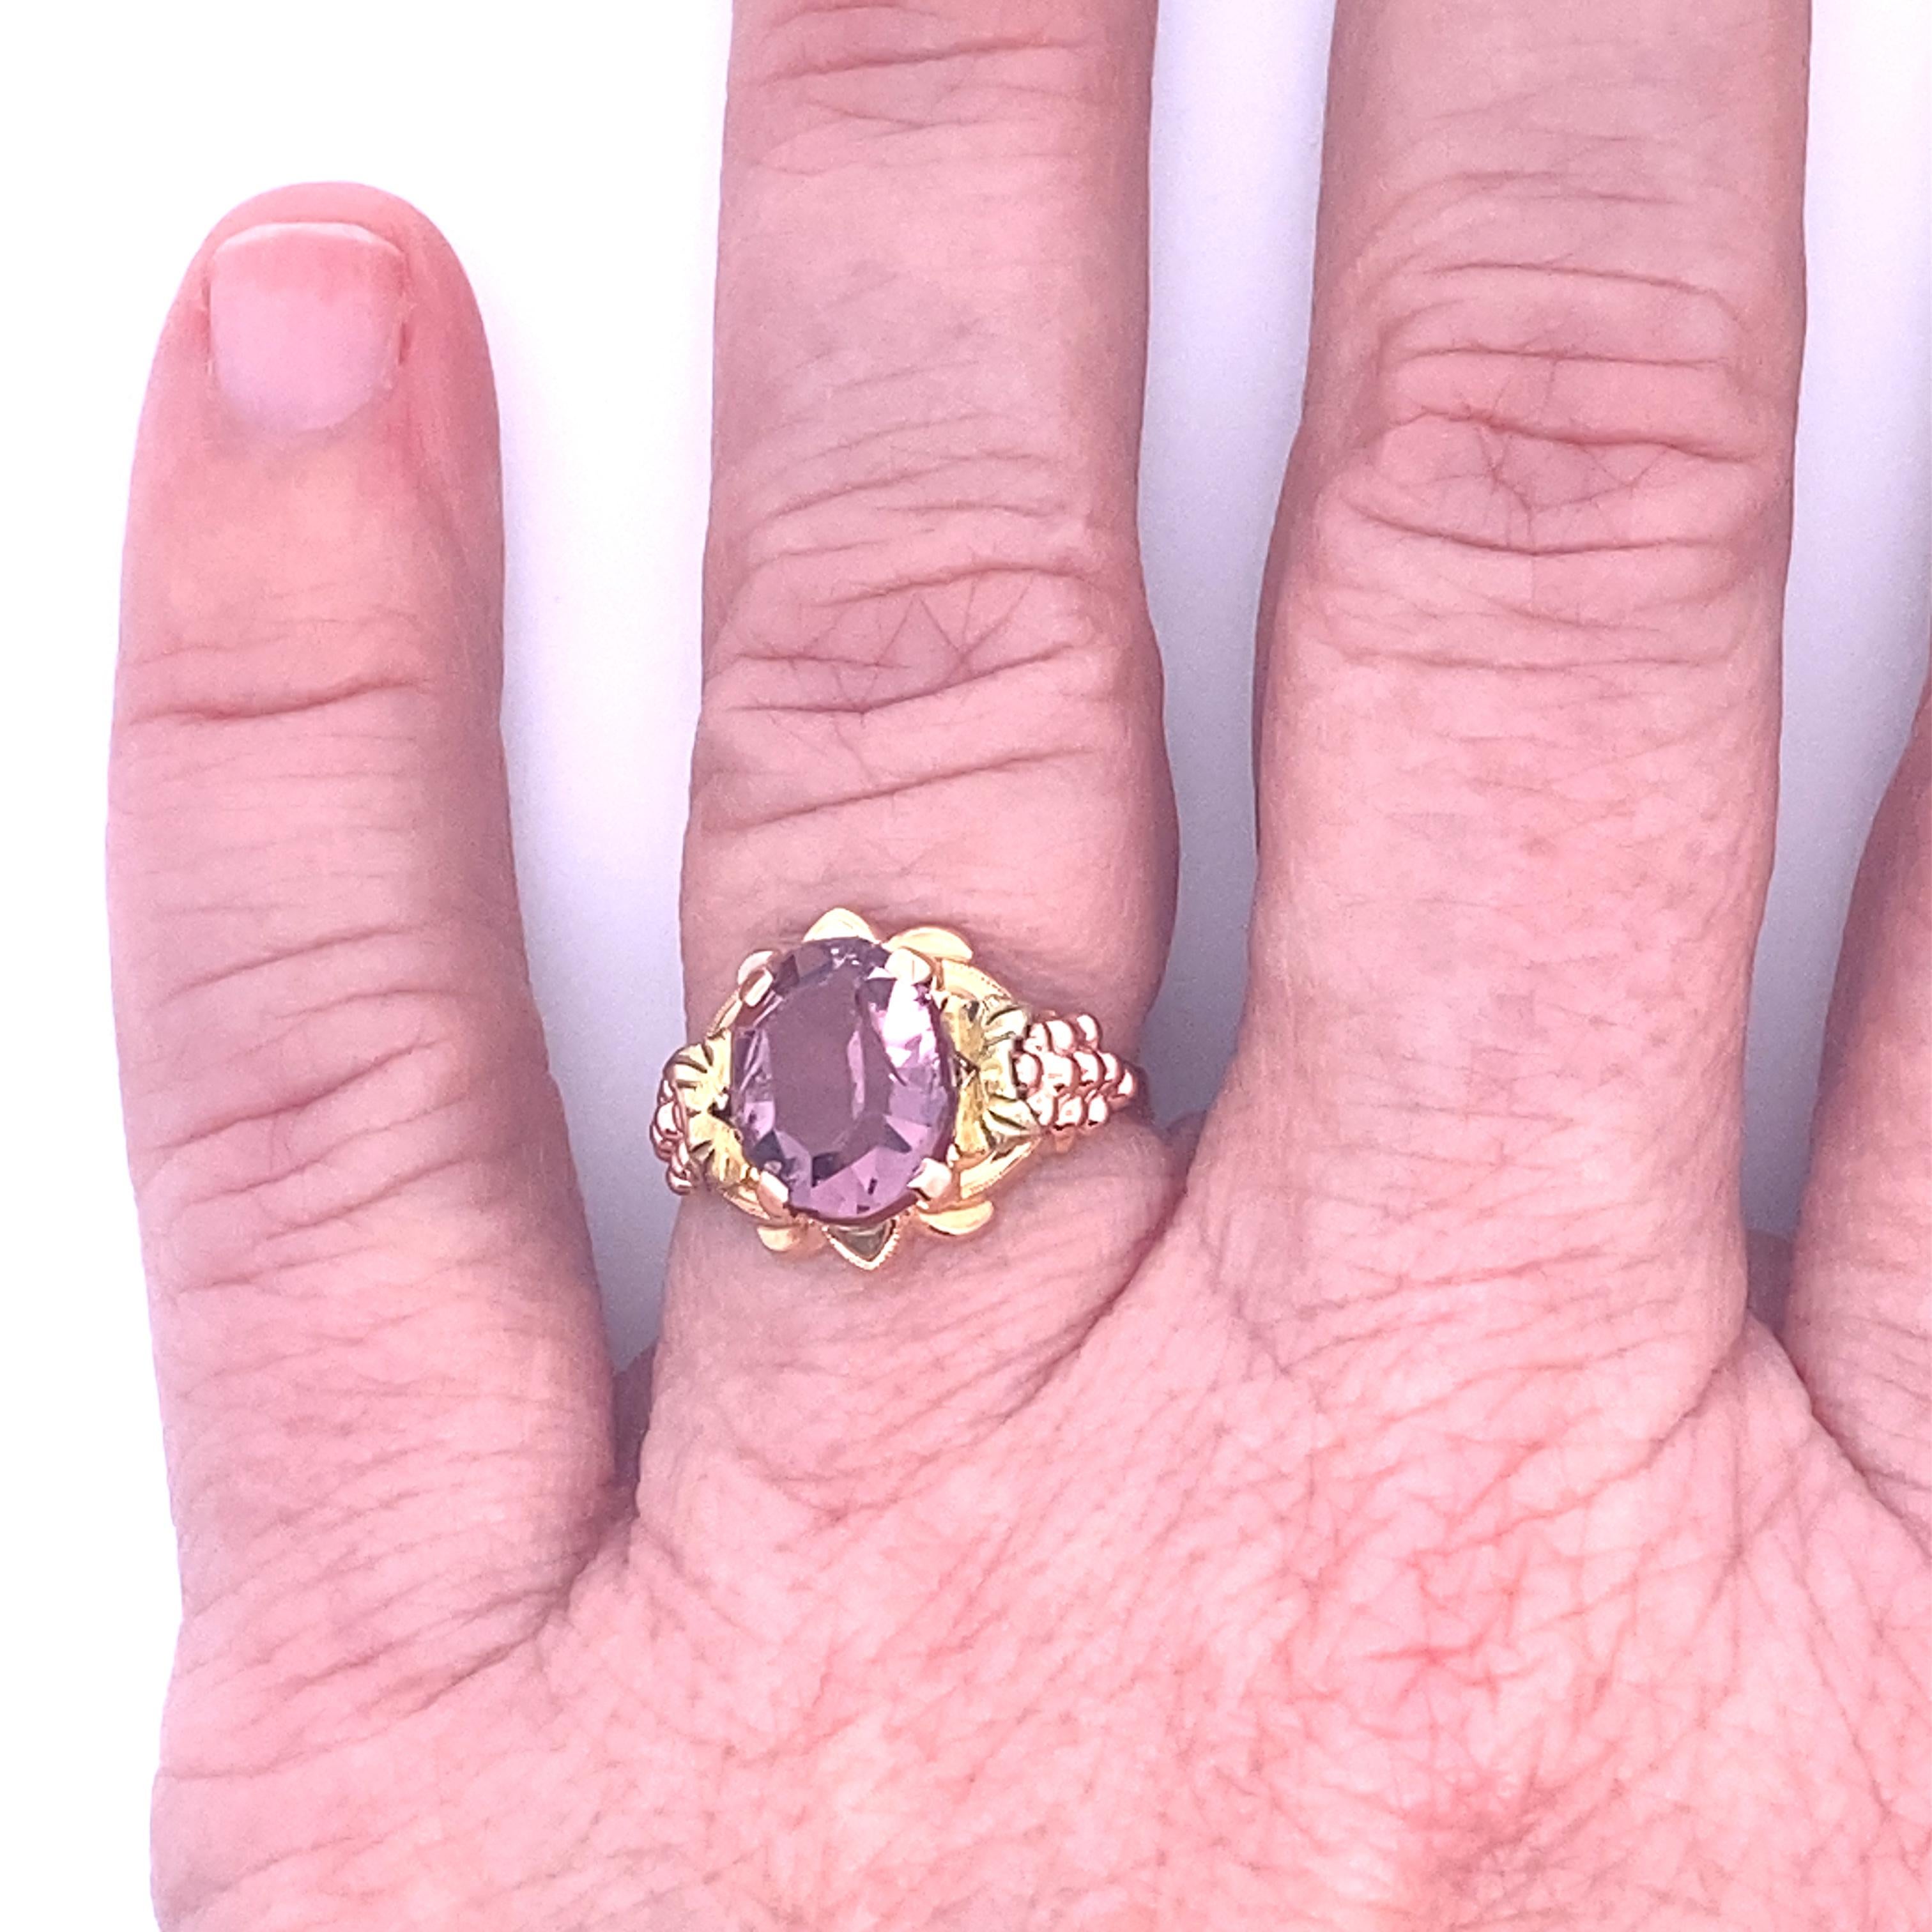 10k rose and yellow two-tone gold amethyst ring. Size 4.5 US. 1.1Dwt